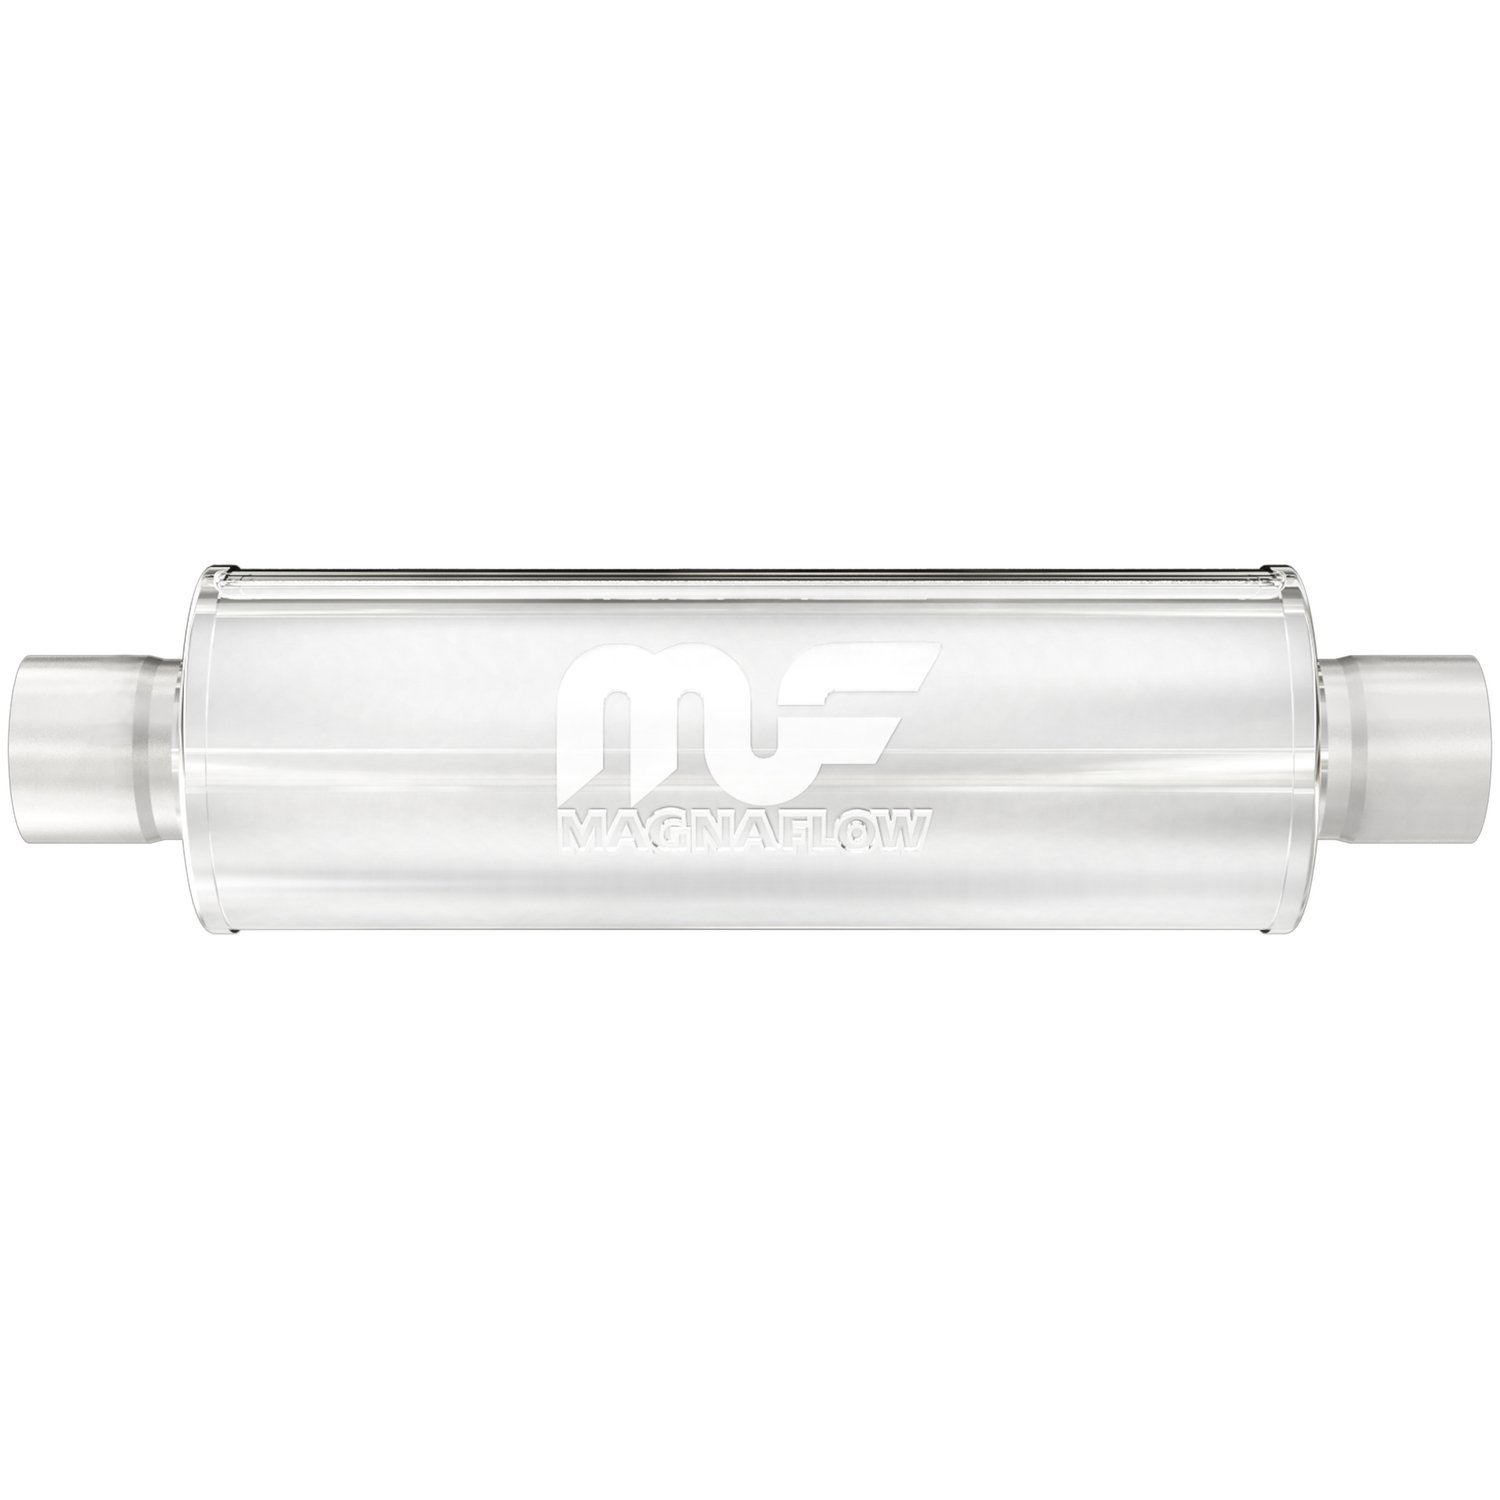 4" Round Muffler Center In/Center Out: 2" Body Length: 14" Overall Length: 20" Core Size: 2.5" Satin Finish